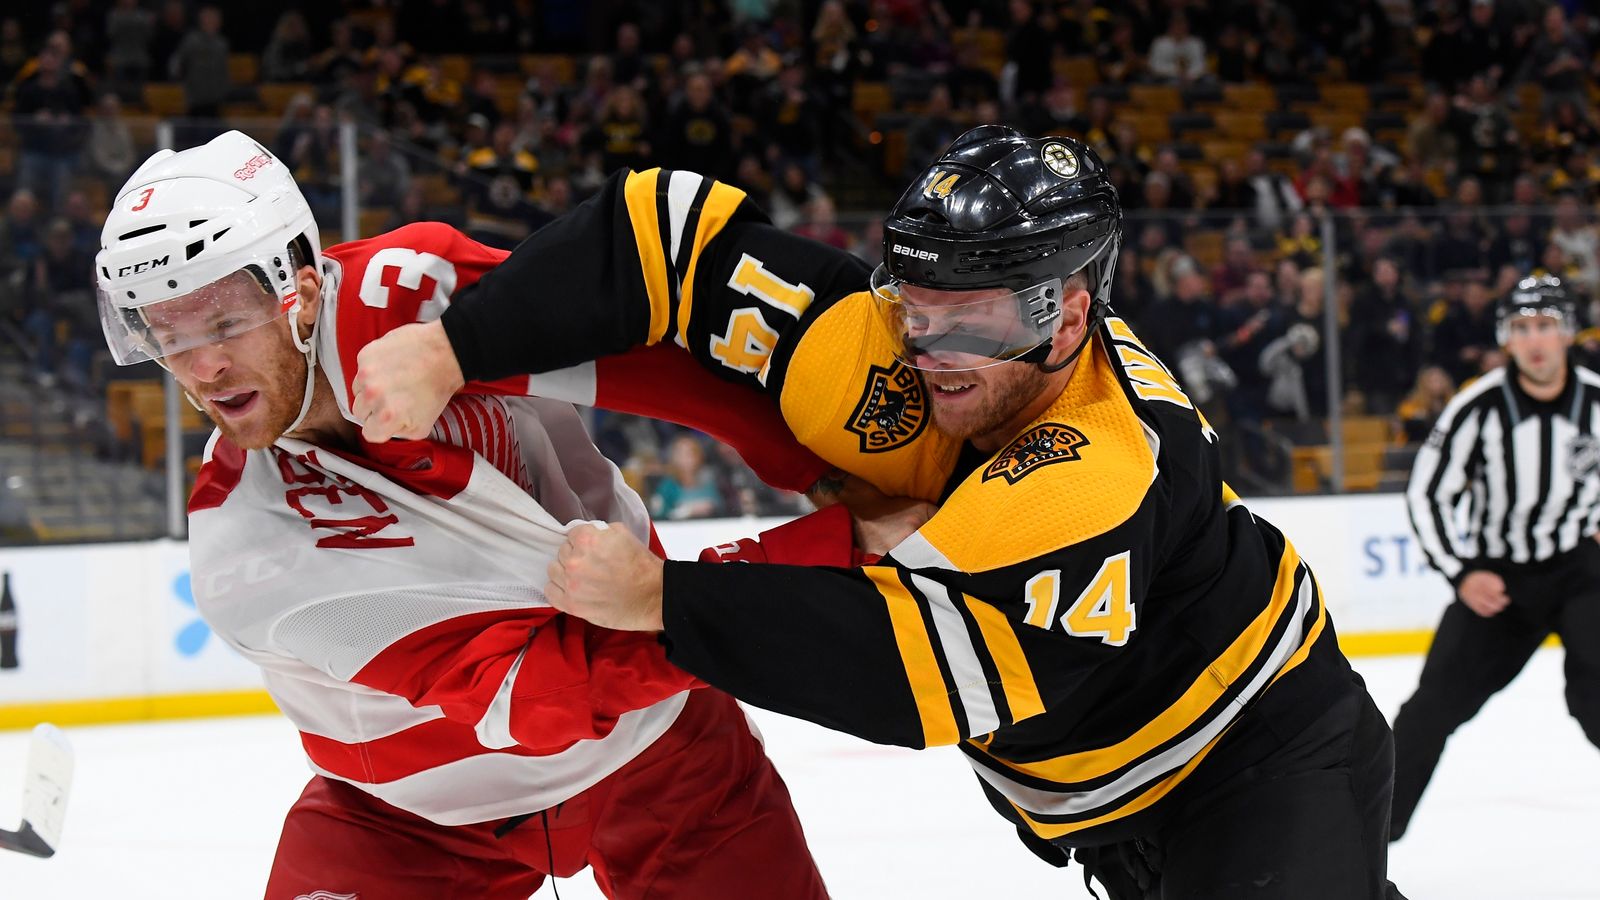 David Krejci thrilled to be back in Black and Gold